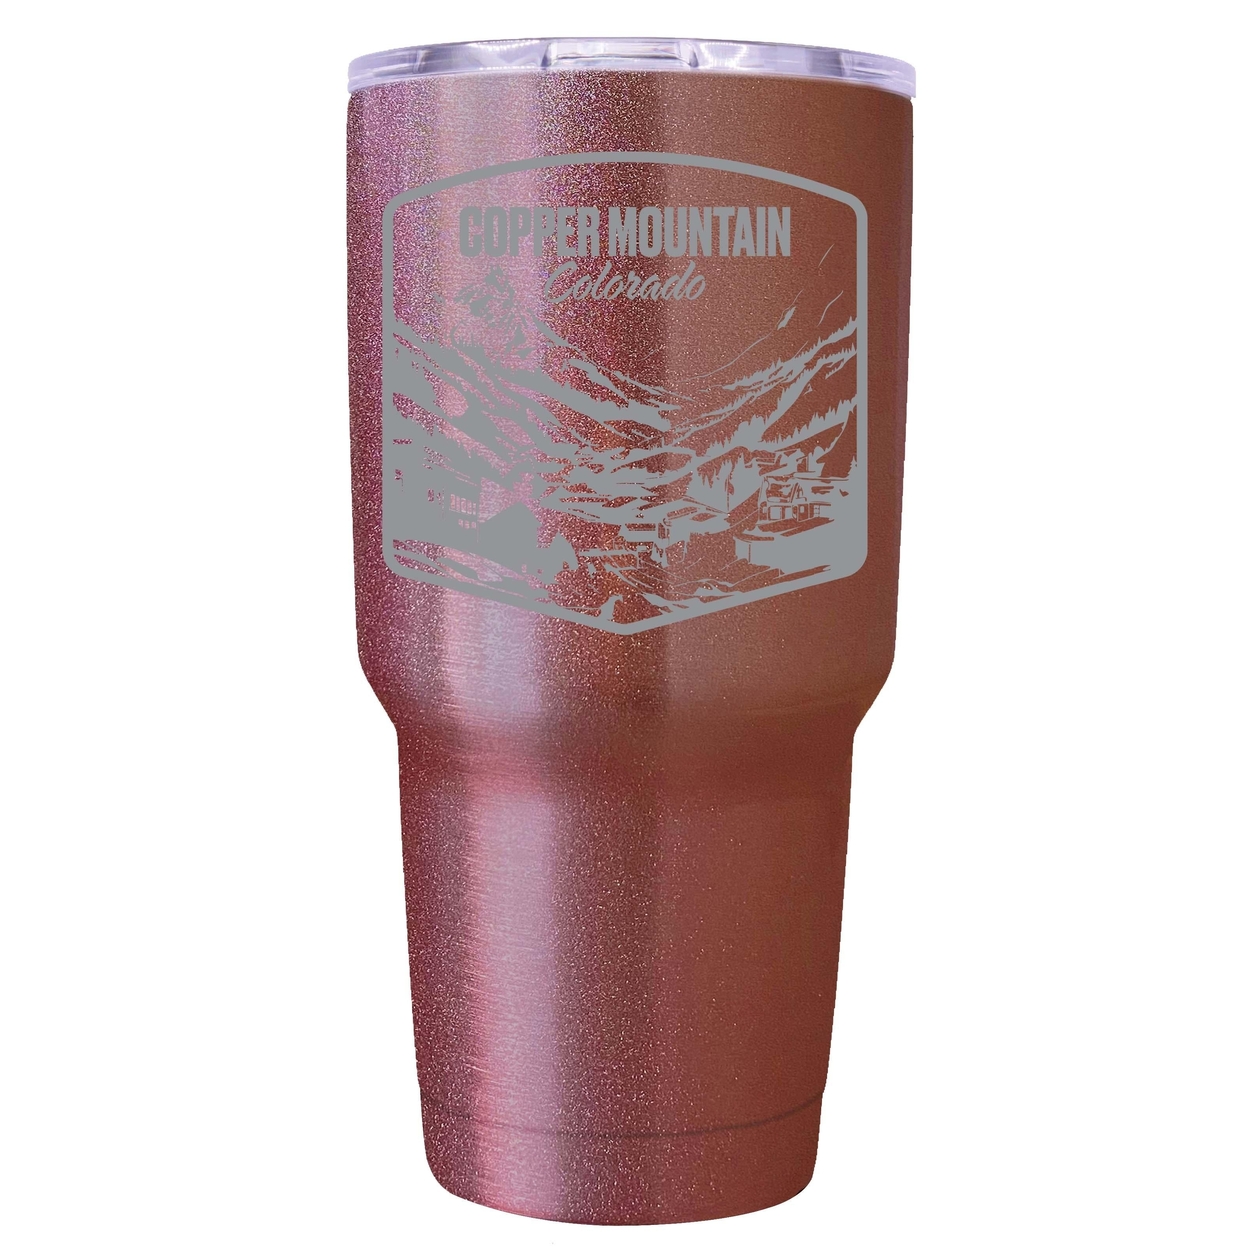 Copper Mountain Souvenir 24 Oz Engraved Insulated Tumbler - Rose Gold,,2-Pack